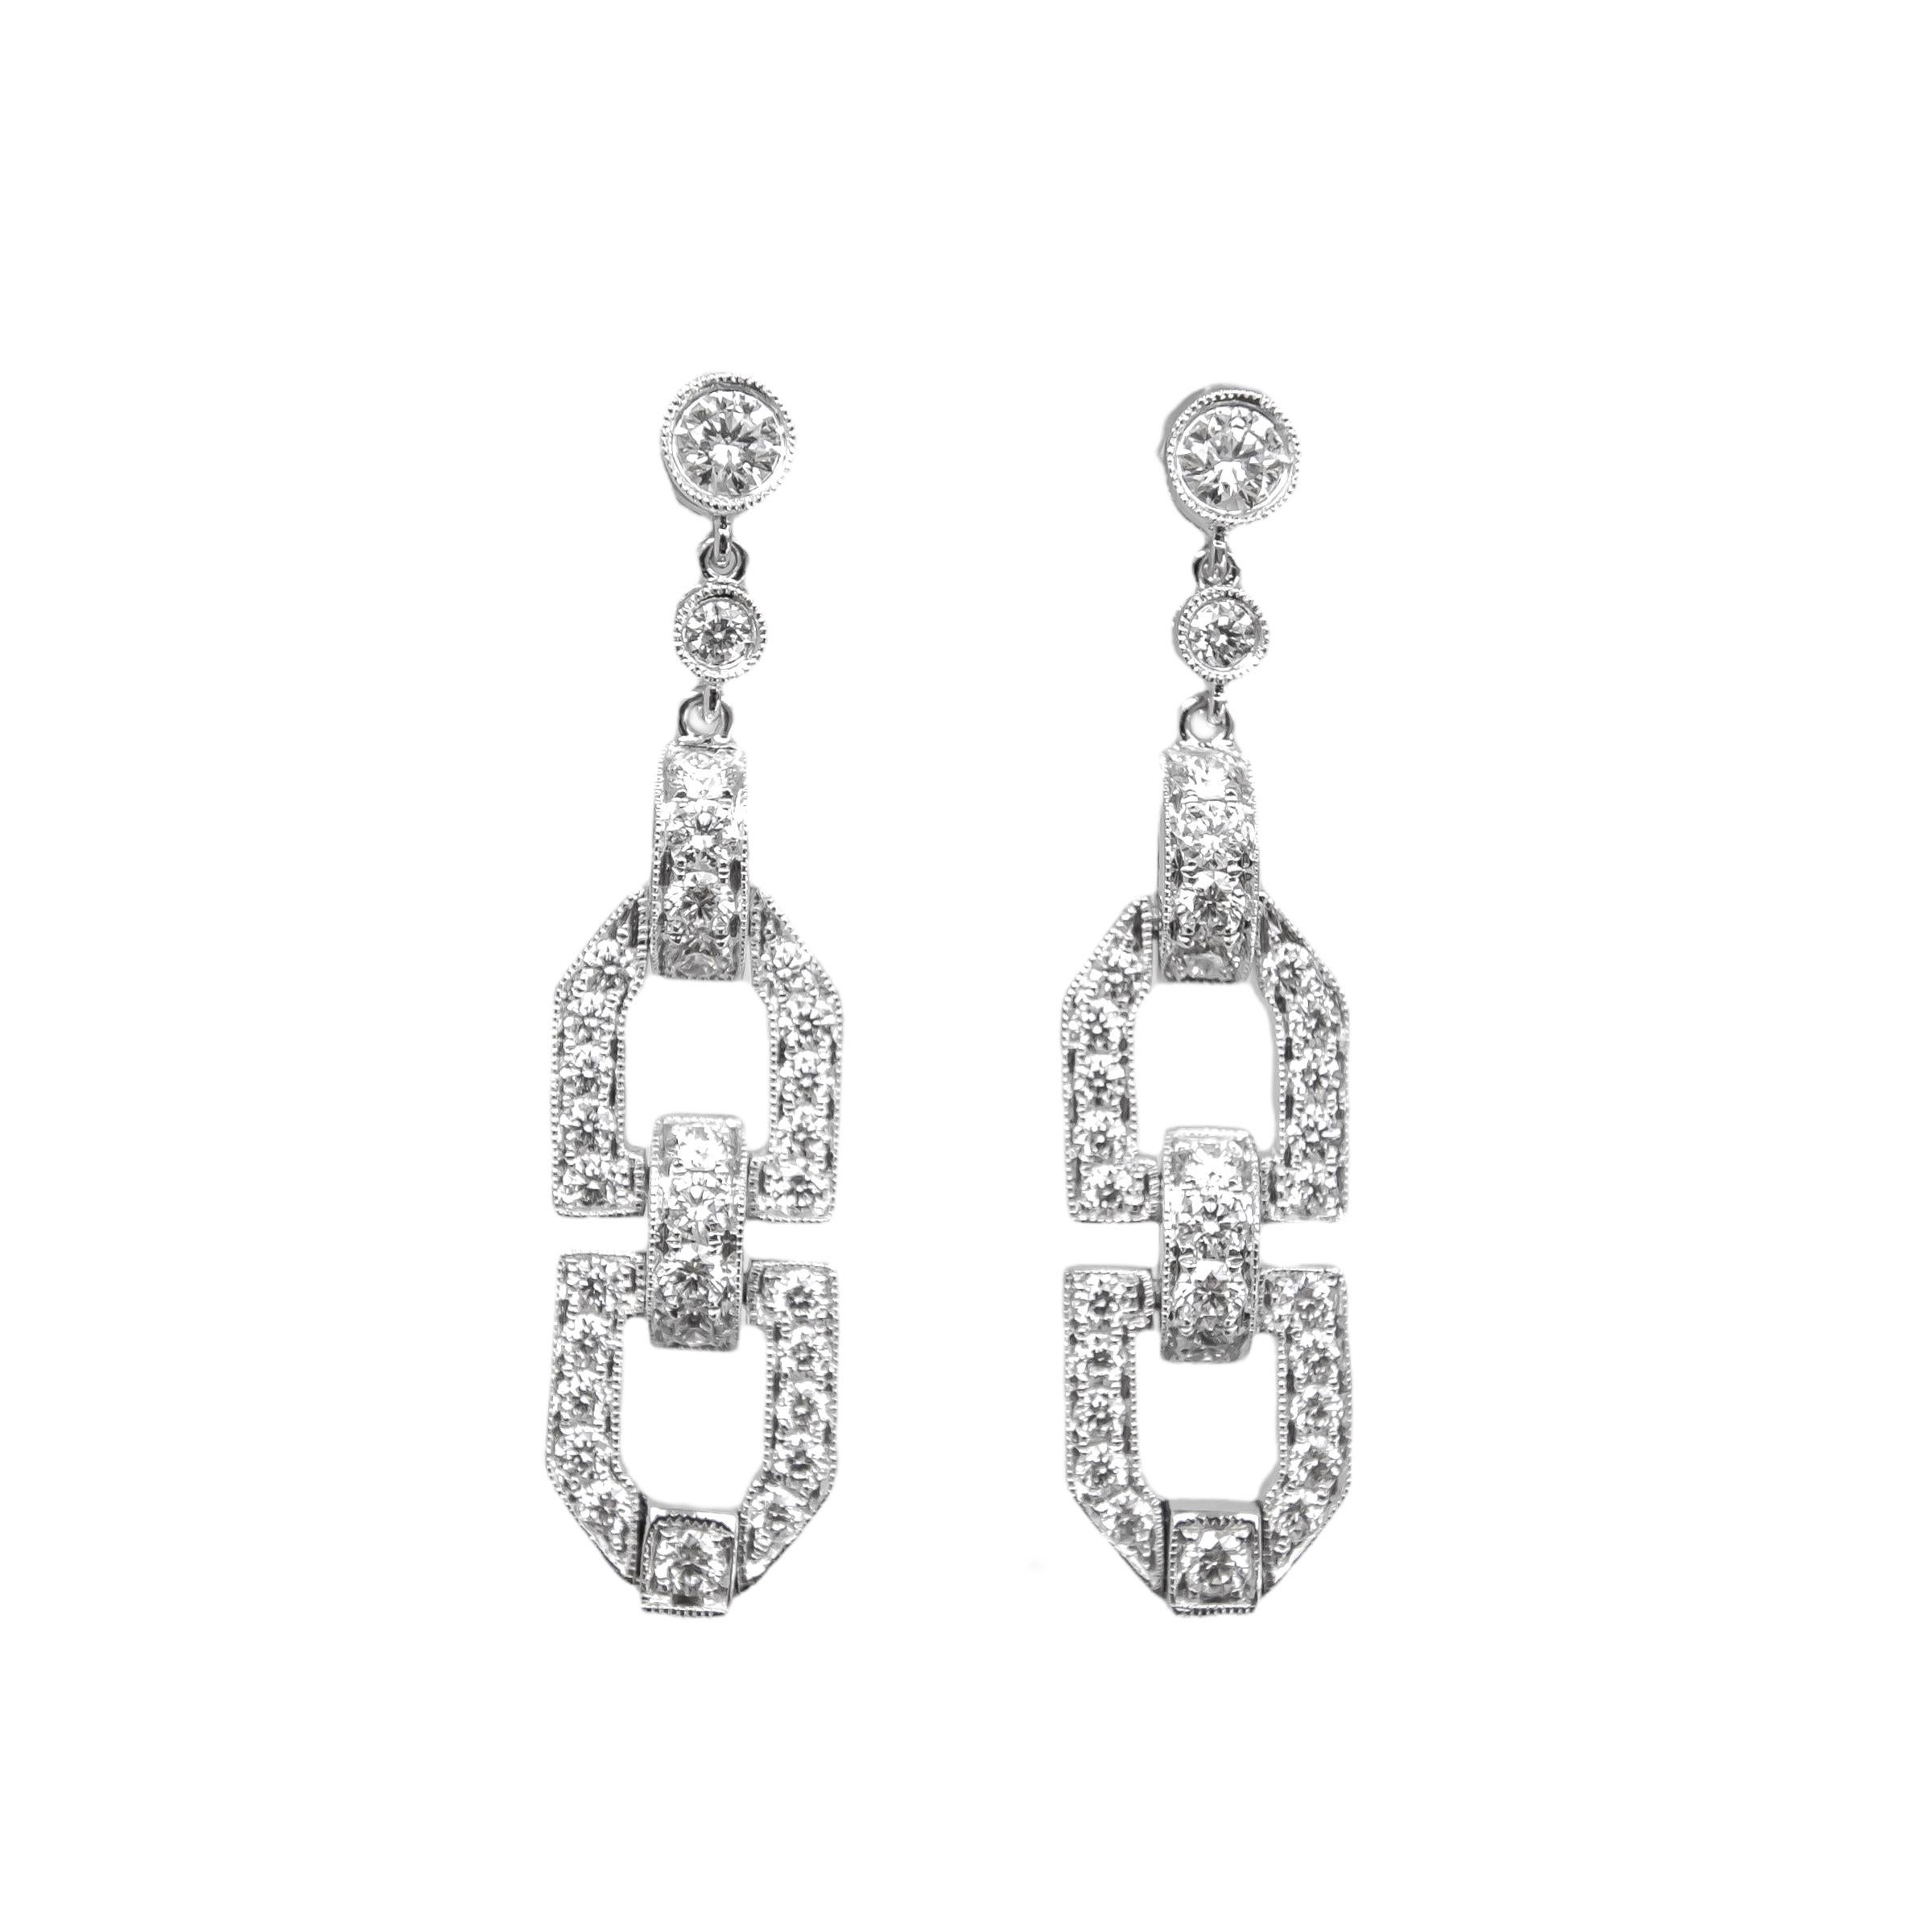 Stunning art deco style diamond earrings, the perfect statement earrings with beautiful filigree detailing on the edges. 

The earrings feature approximately 1.60ct of natural diamonds and can be crafted in 18k white, rose or yellow gold. 

The drop